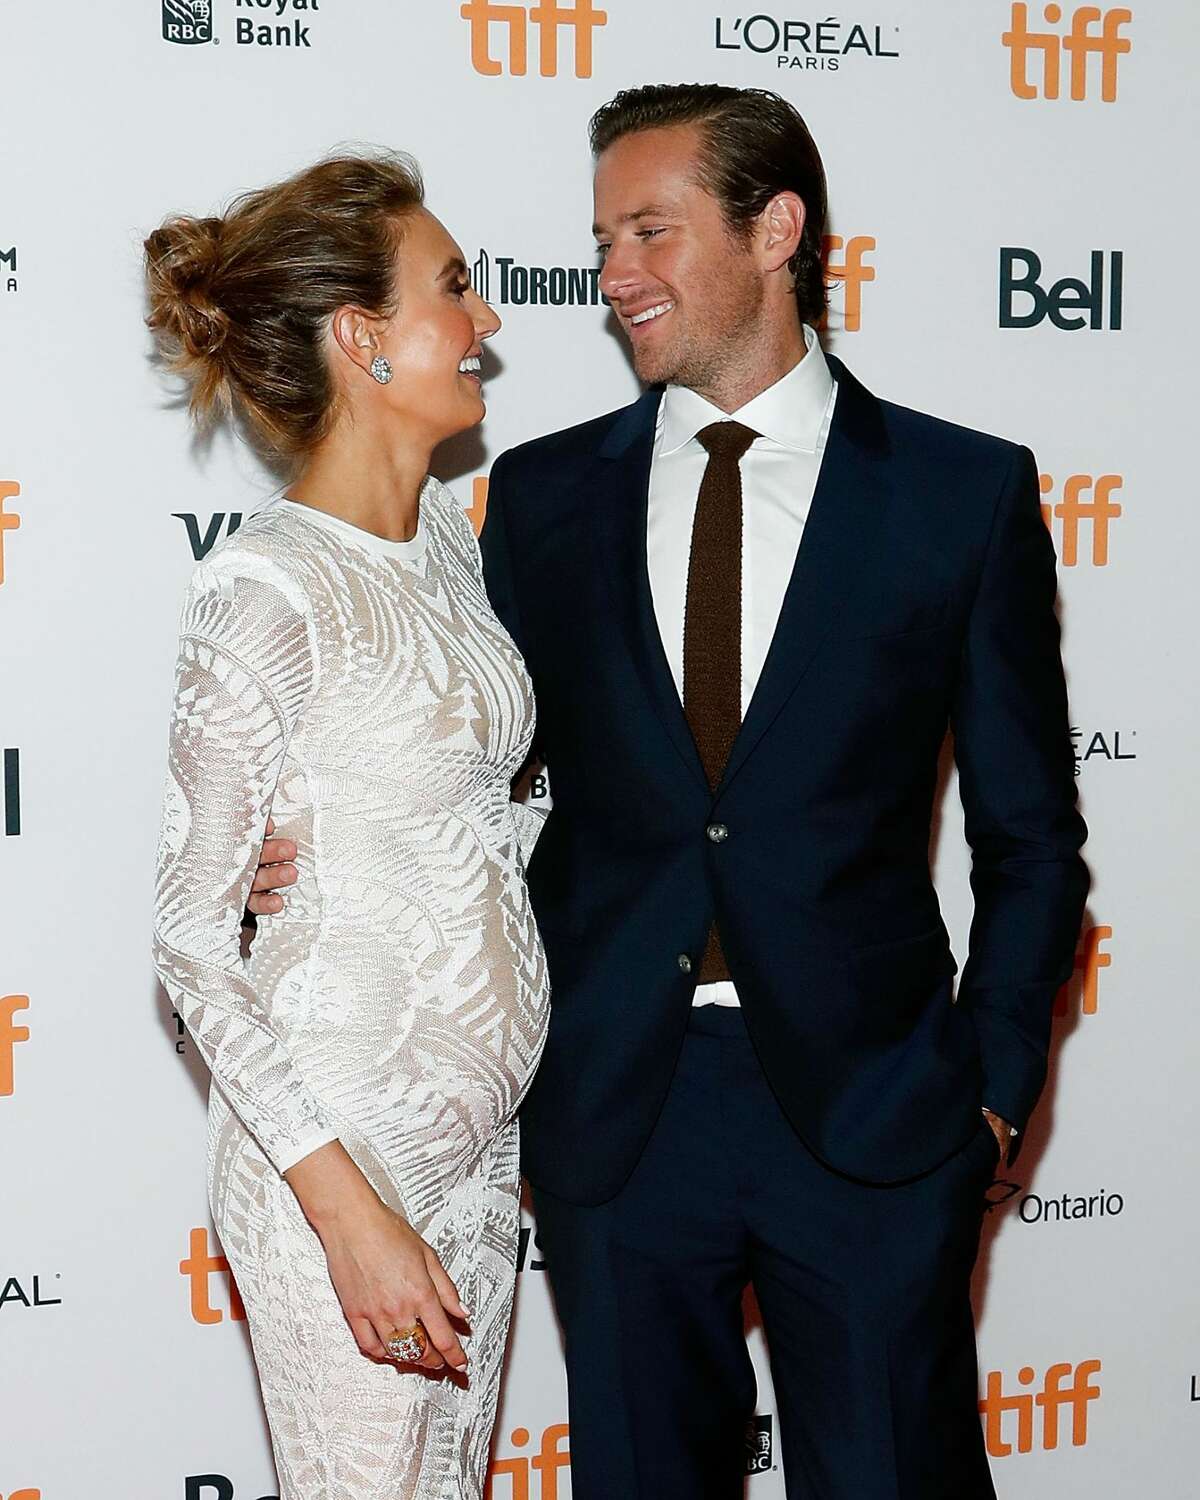 San Antonio's Elizabeth Chambers and Armie Hammer announce she's expecting her second child at the world premiere of his movie, 'Free Fire' during the 2016 Toronto International Film Festival at Ryerson Theatre on September 7, 2016 in Toronto, Canada. (Photo by Taylor Hill/FilmMagic)